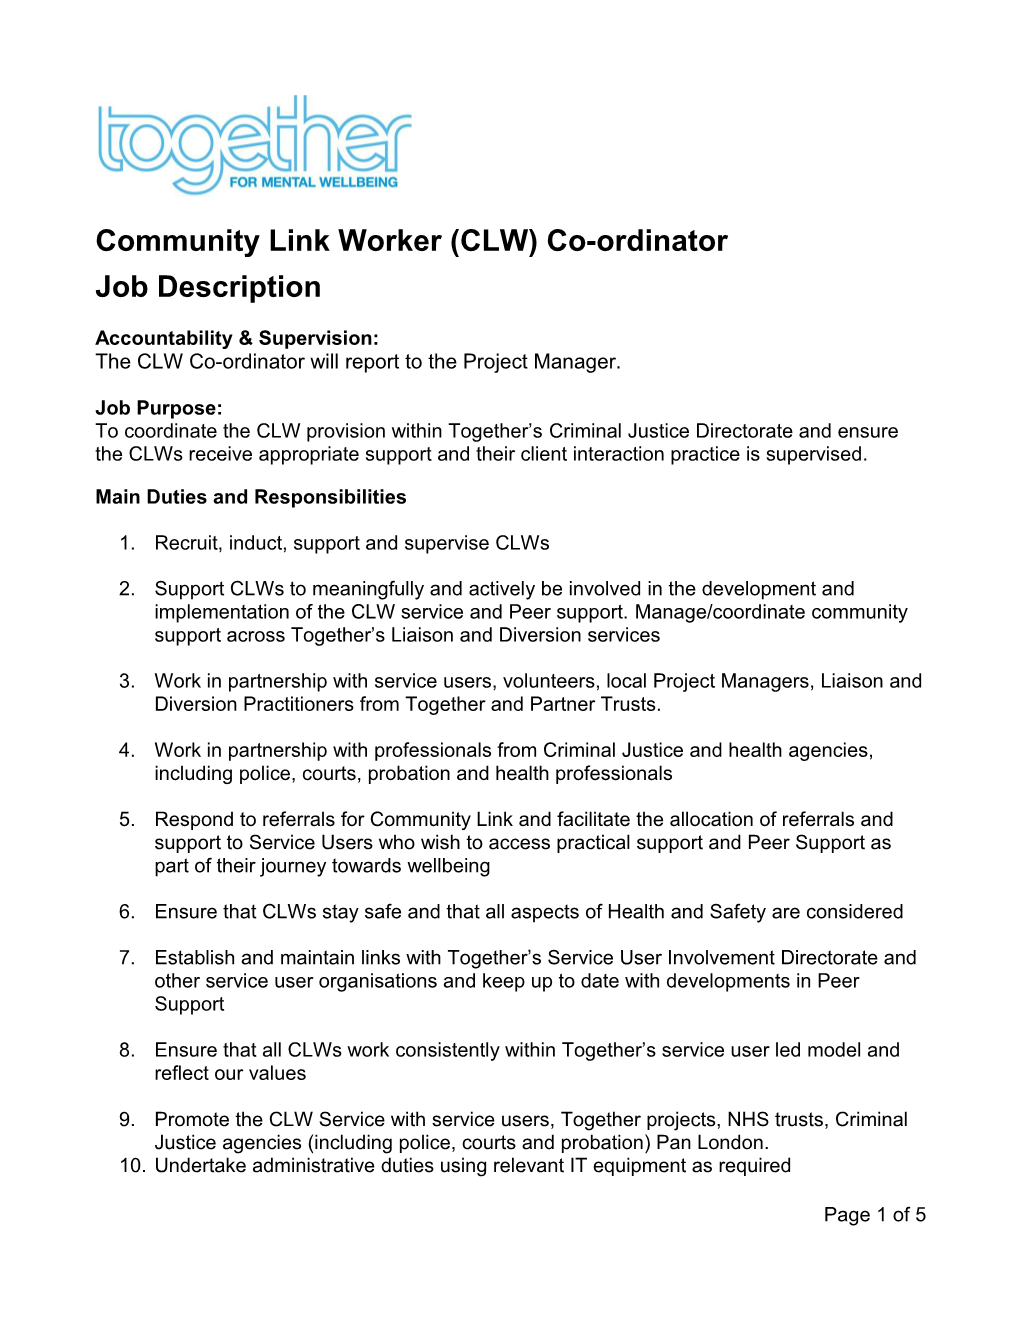 Community Link Worker (CLW) Co-Ordinator